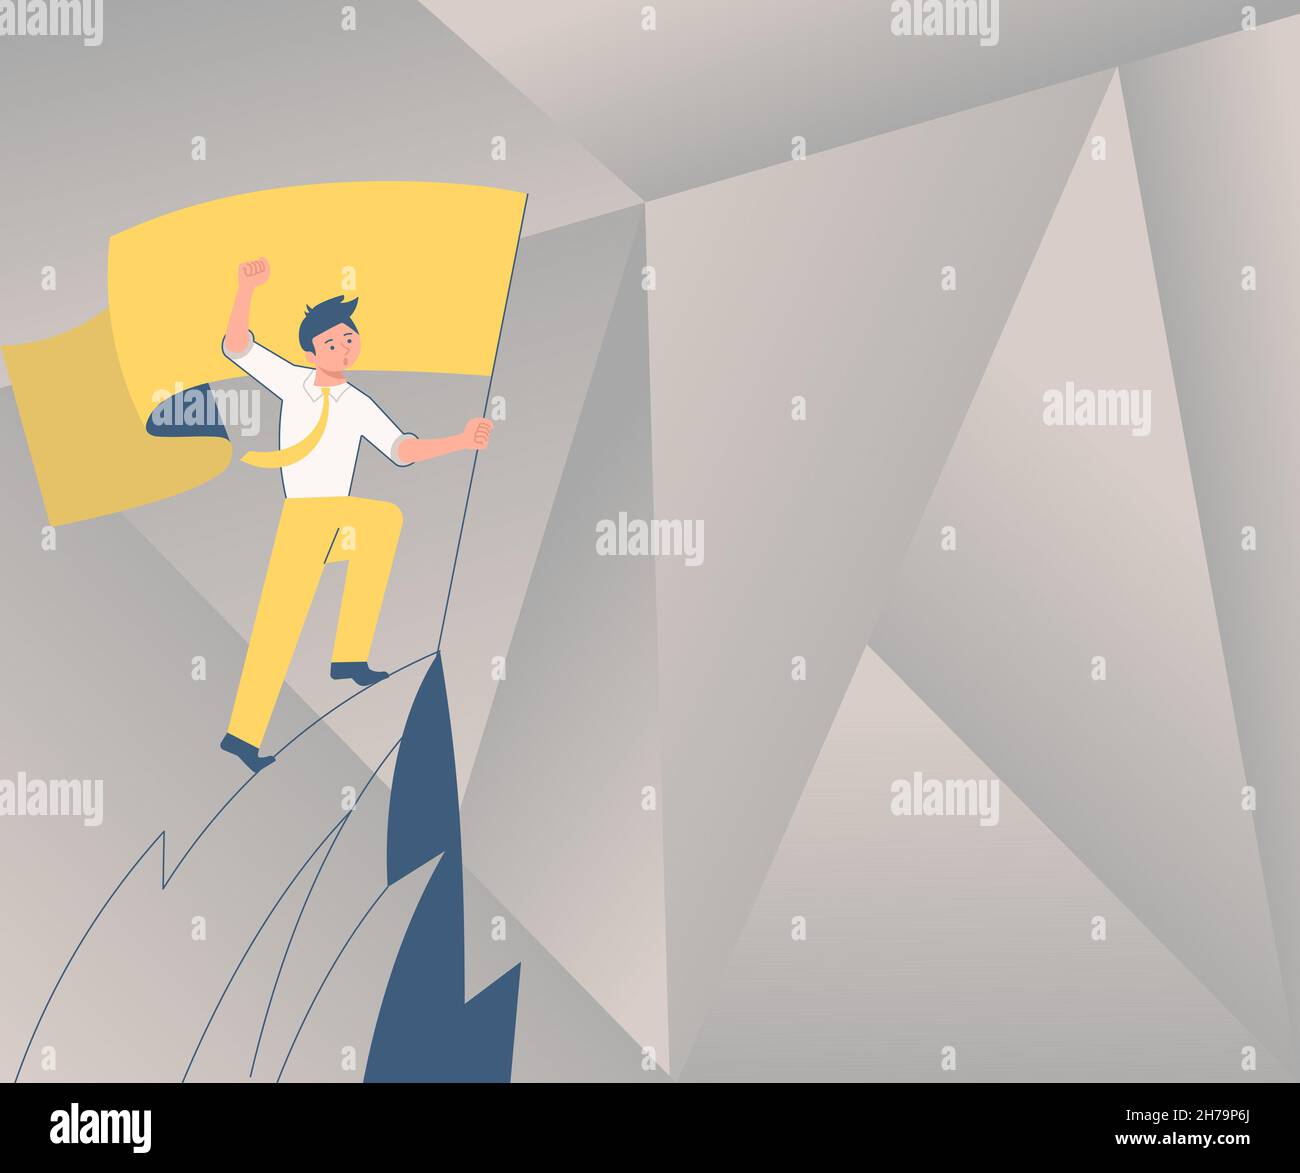 Man On A Mountain Drawing Proud Of His Climbing Success To The Clouds. Athlete On A Cliff Celebrating Achievement Ascending To The Top. Sports Guy Stock Vector